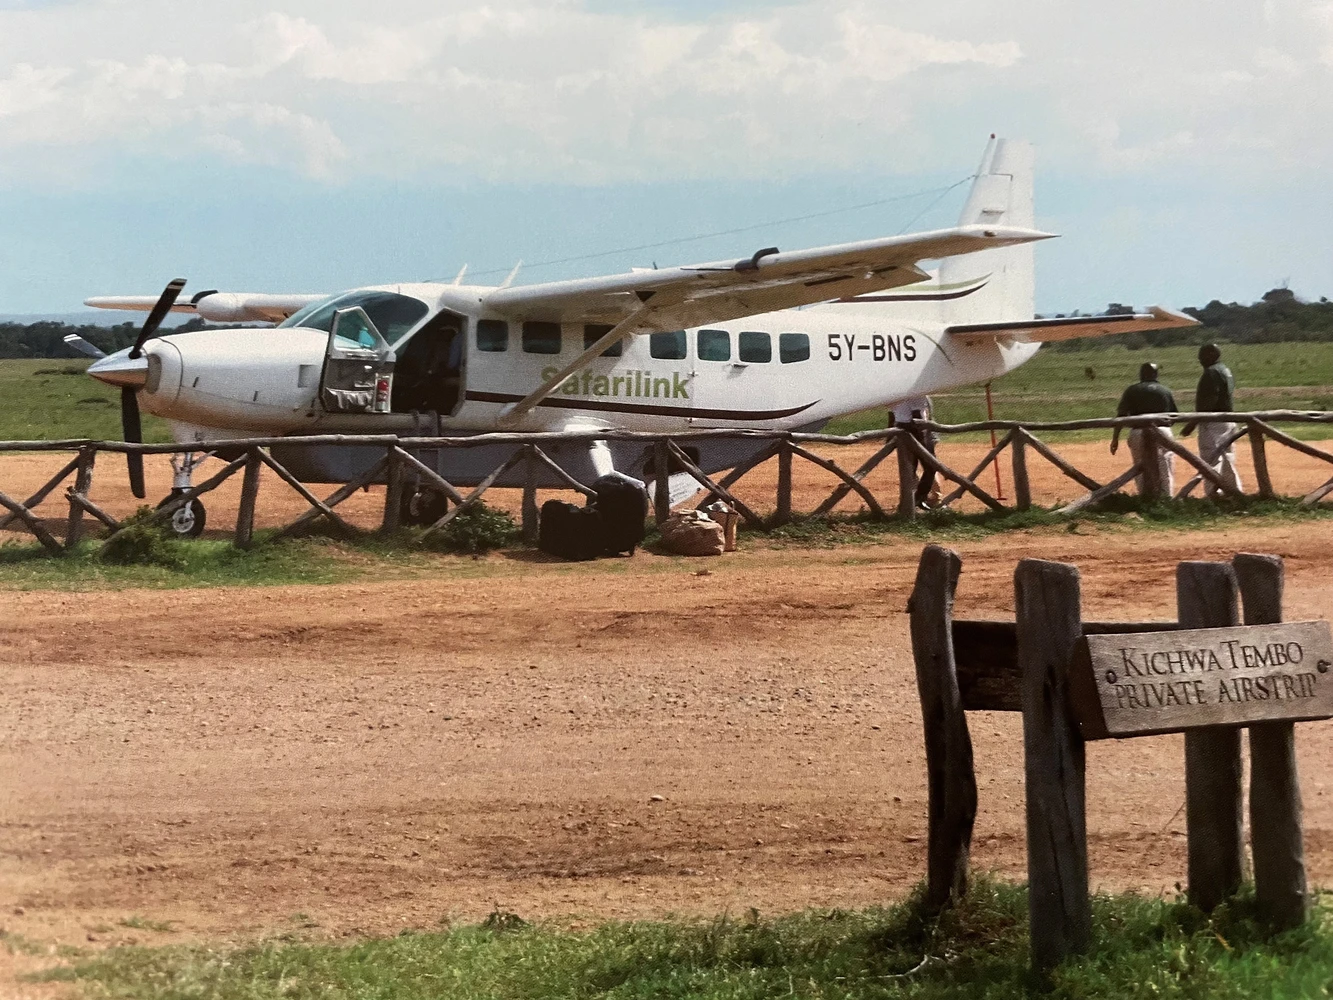 airplane the author was a passenger in while on safari. Photo by the author.